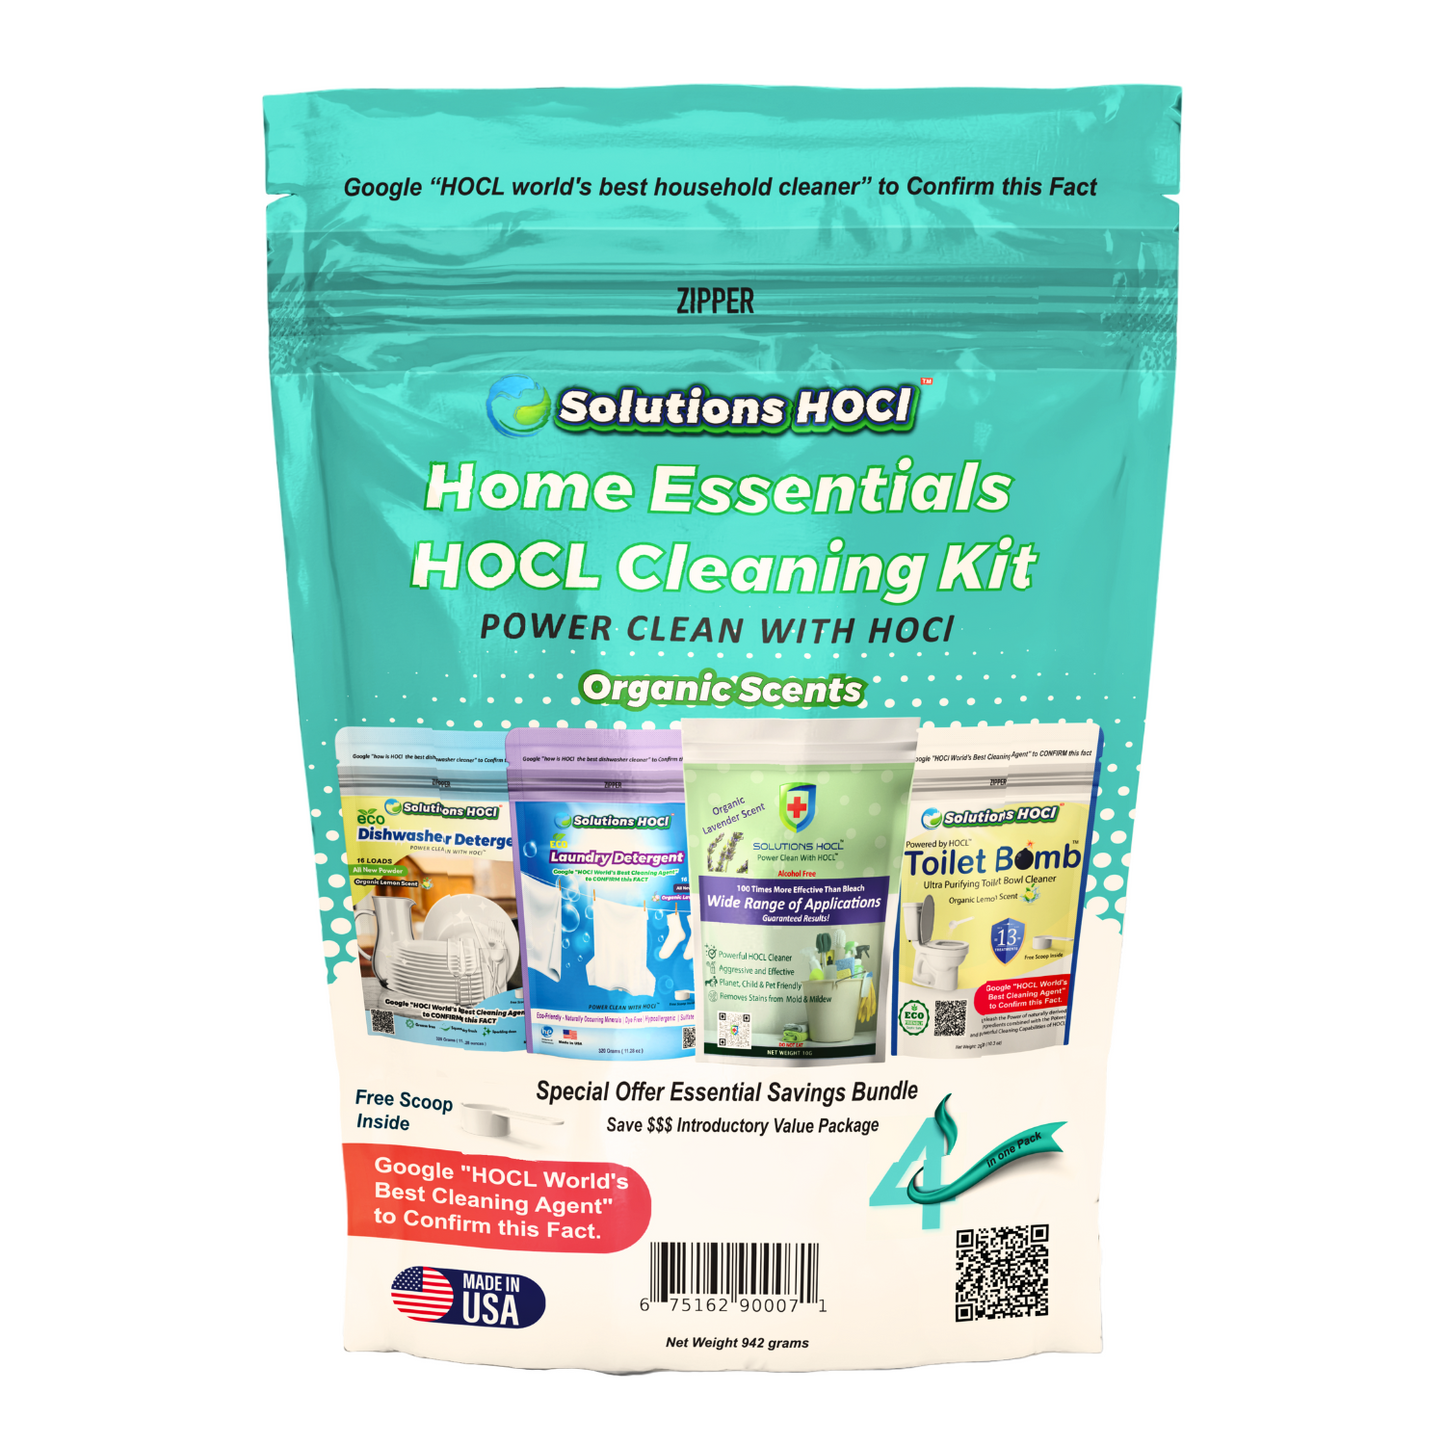 Home Essentials HOCL Cleaning Kit Organic Scents